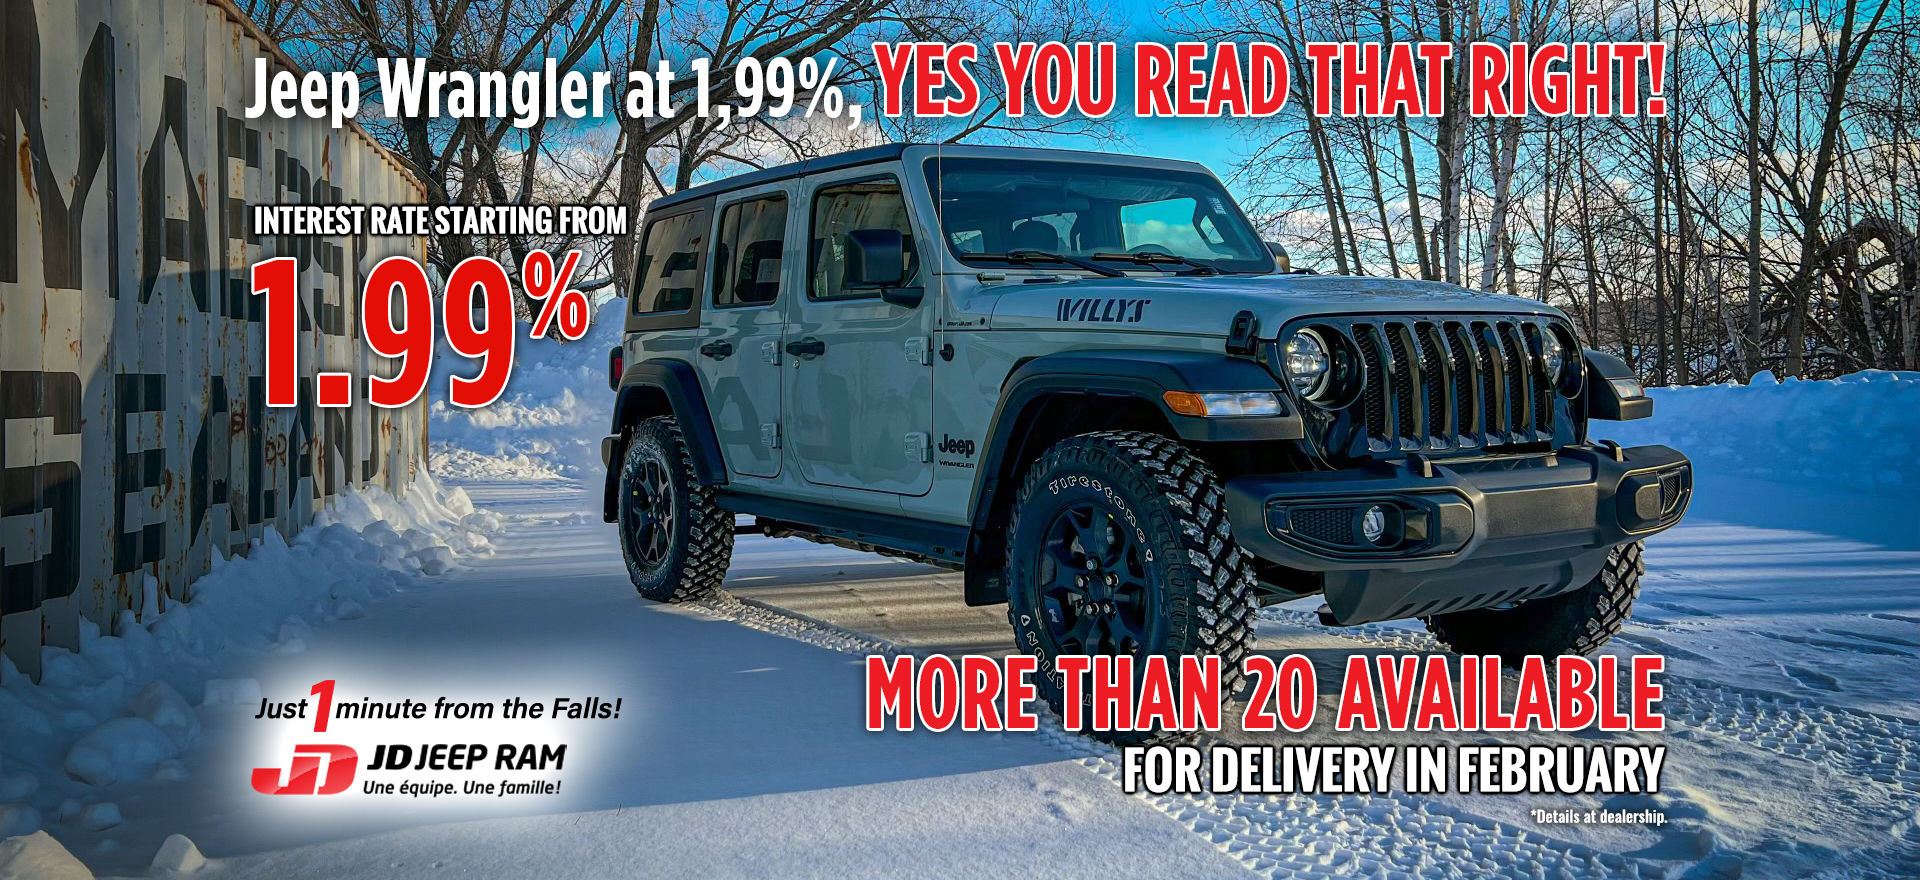 JD Jeep Ram in Boischatel | A Wrangler at % interest rate, yes you read  that right!